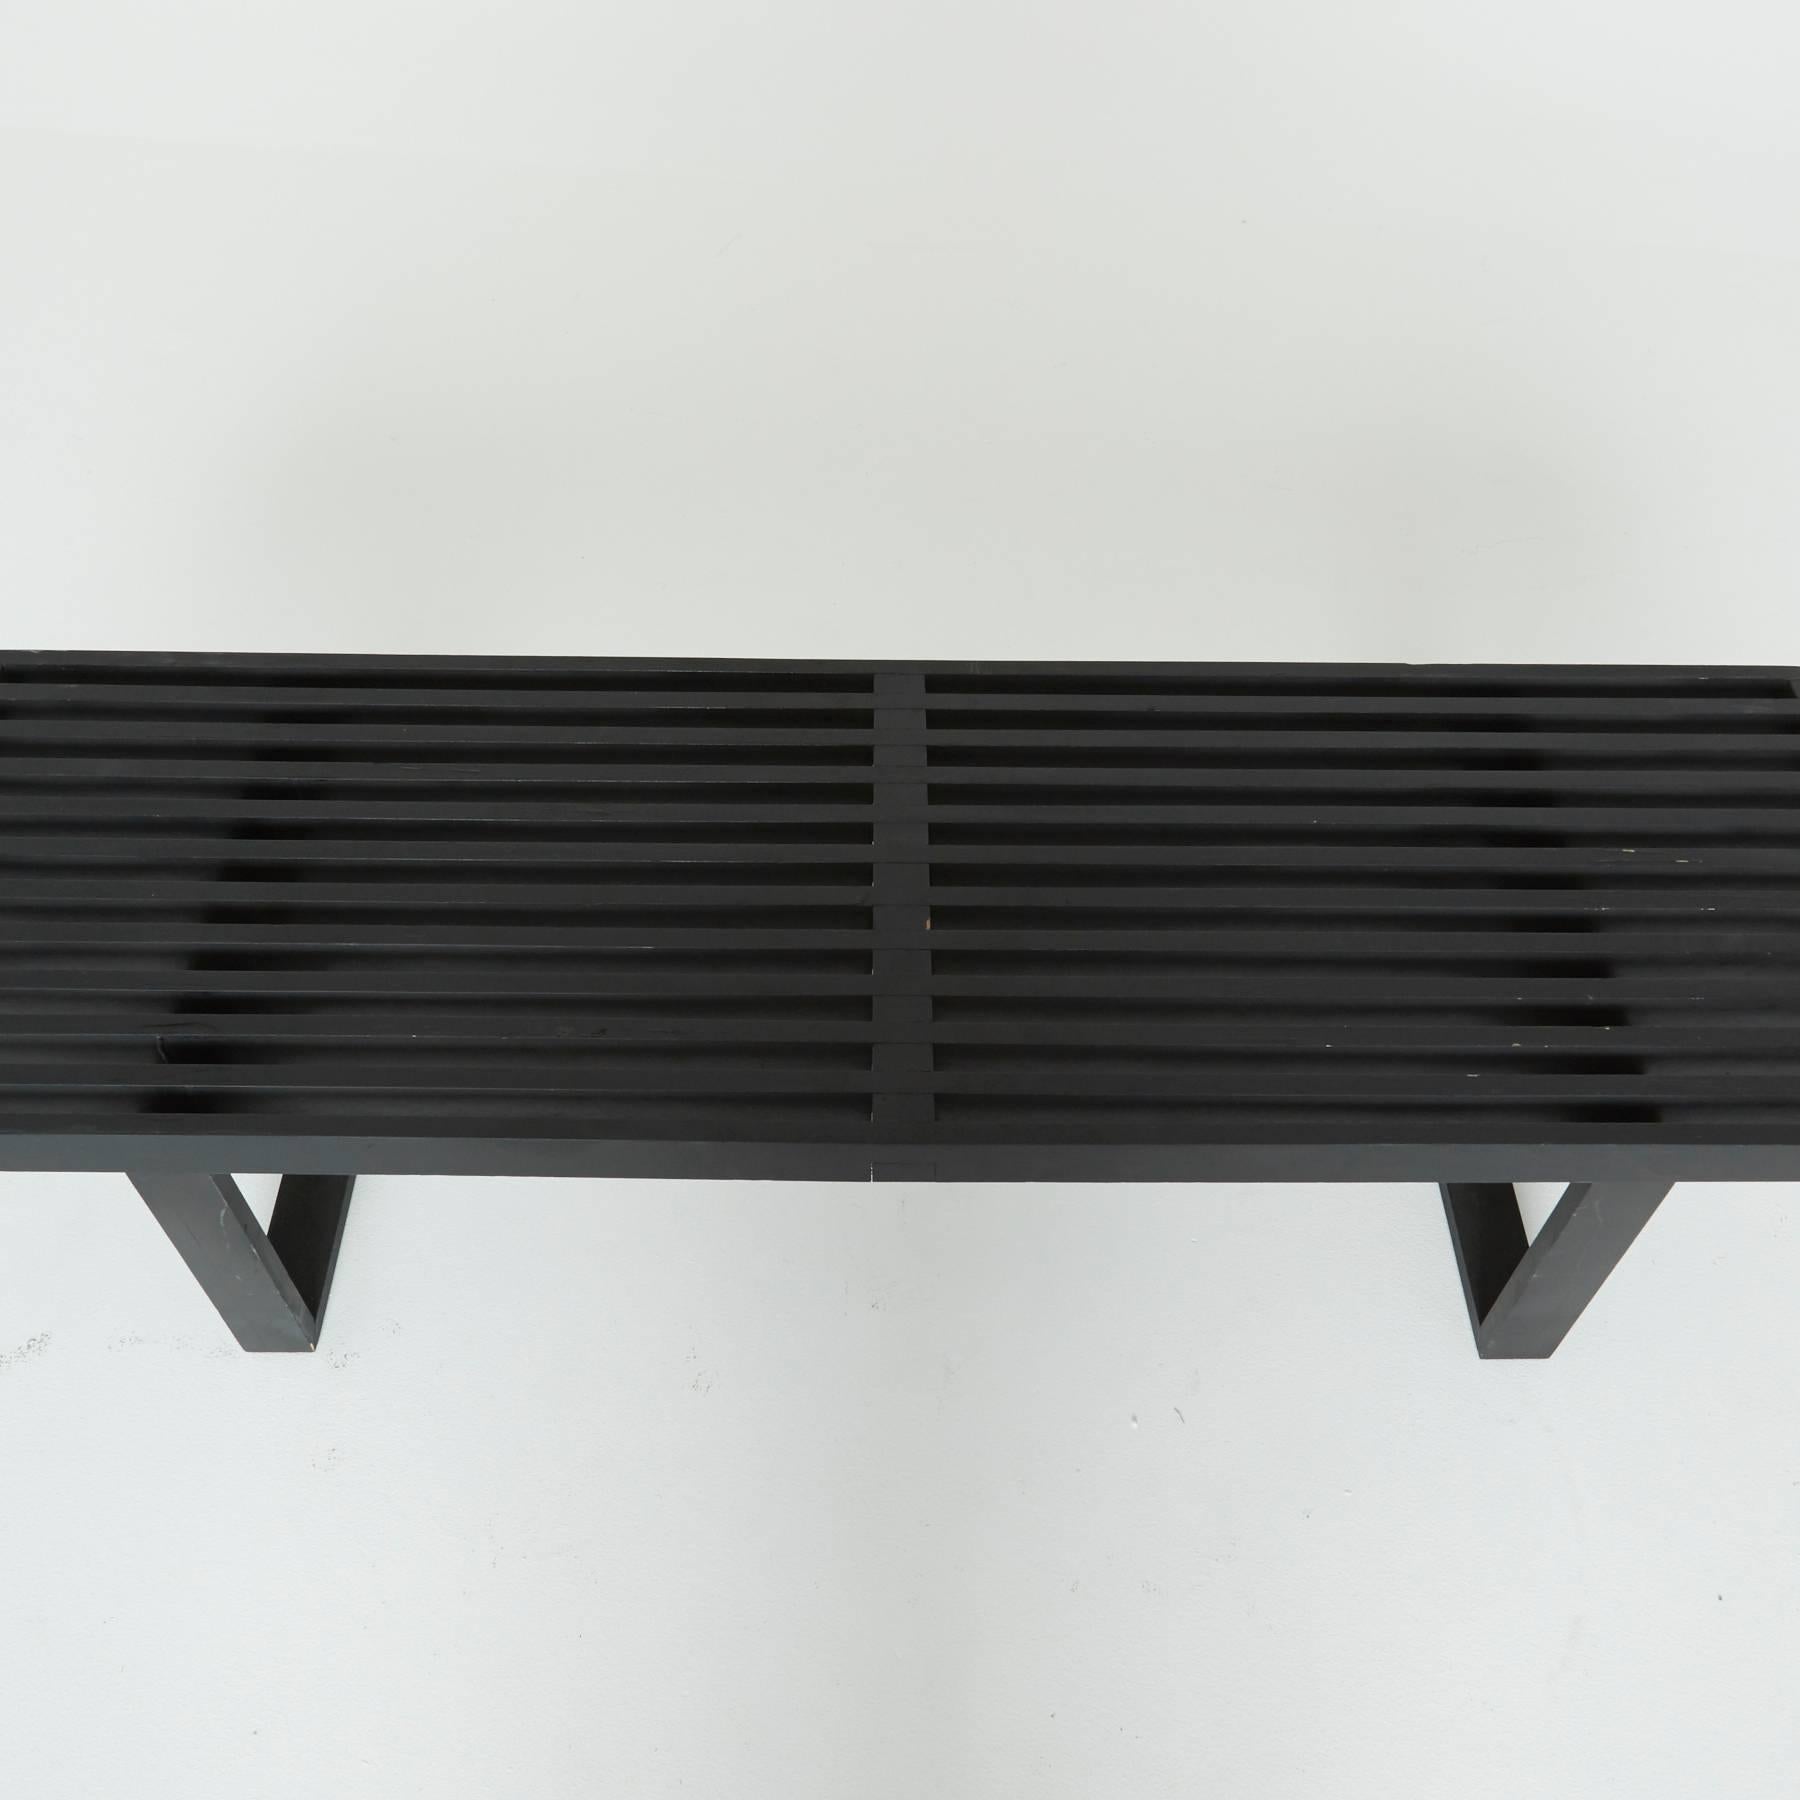 Mid-Century Modern Black Slatted Wood Bench by George Nelson for Herman Miller